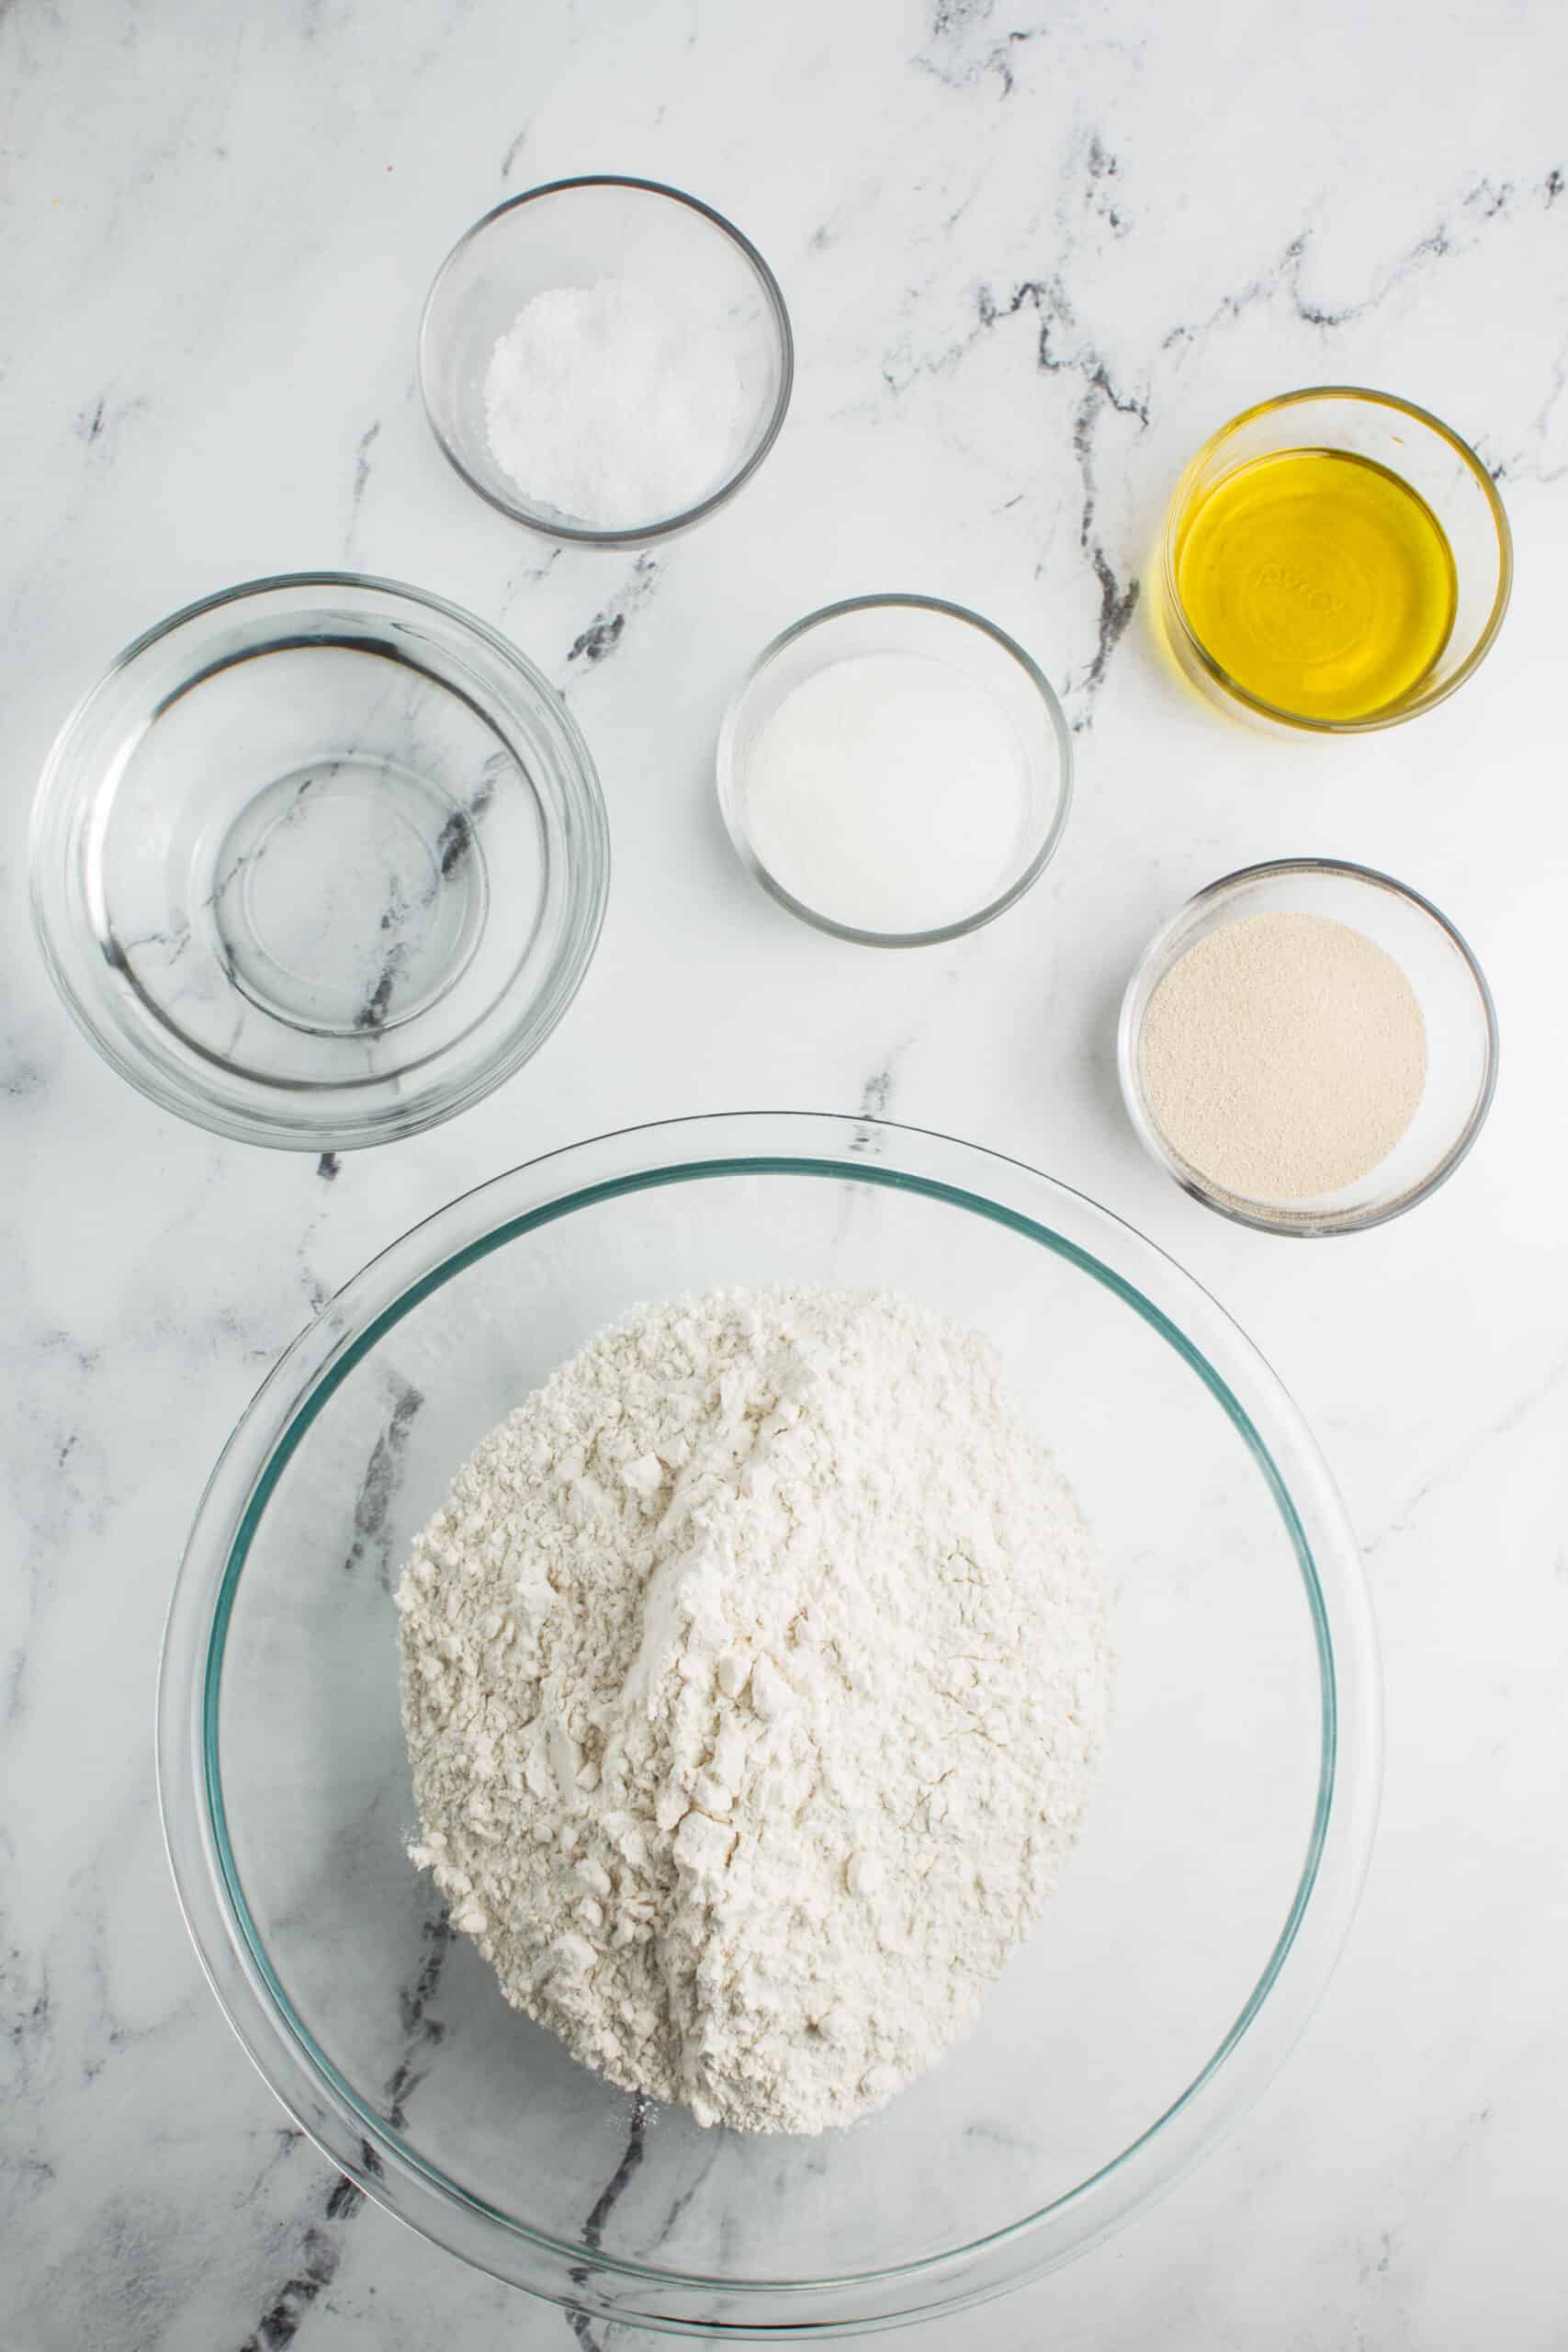 This ingredient shot features flour, salt, sugar, water, yeast, and oil, showcasing the essential elements used in the homemade sandwich bread recipe.